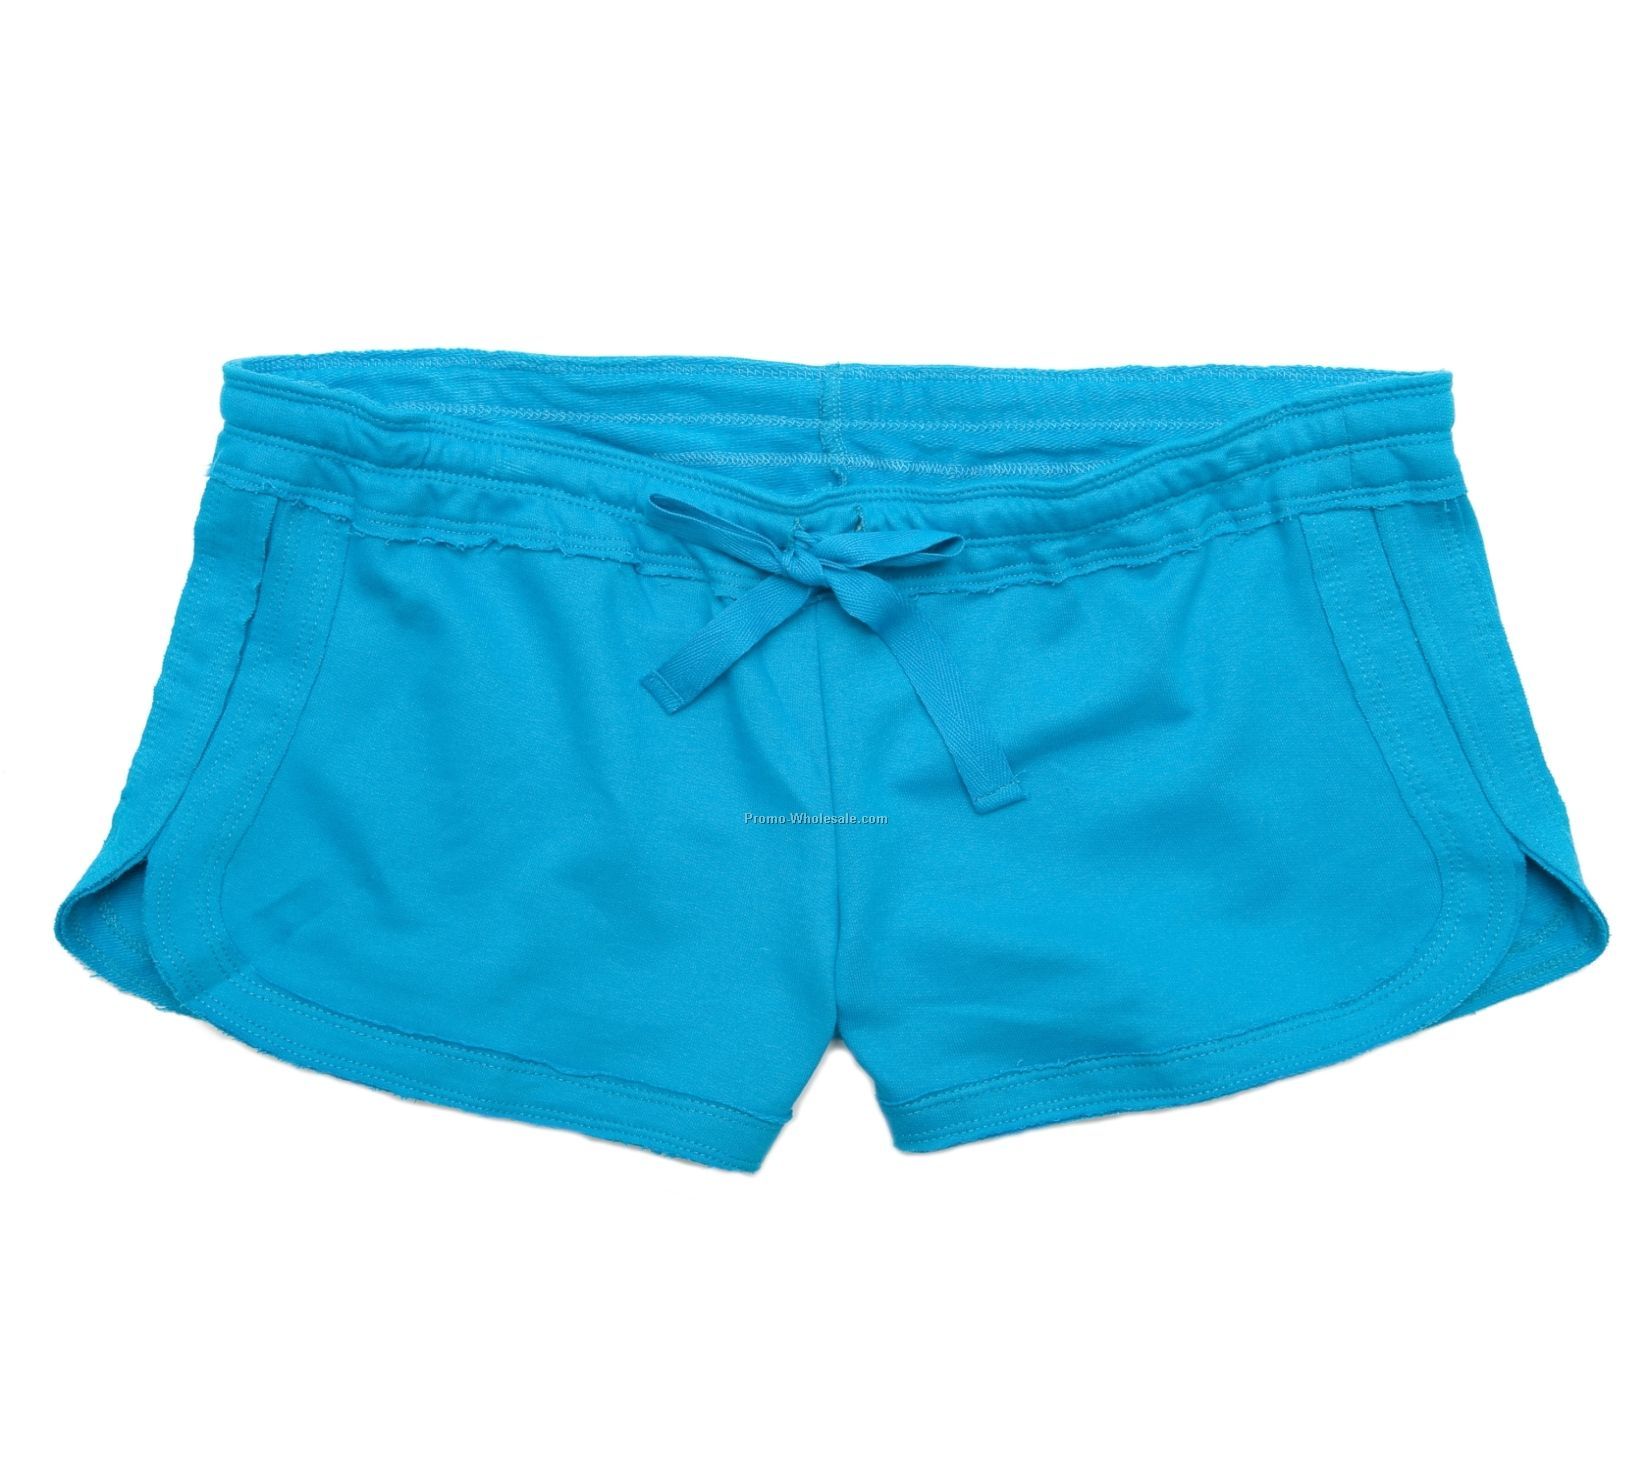 Youth Turquoise Chrissy Shorts (Ys-yl)